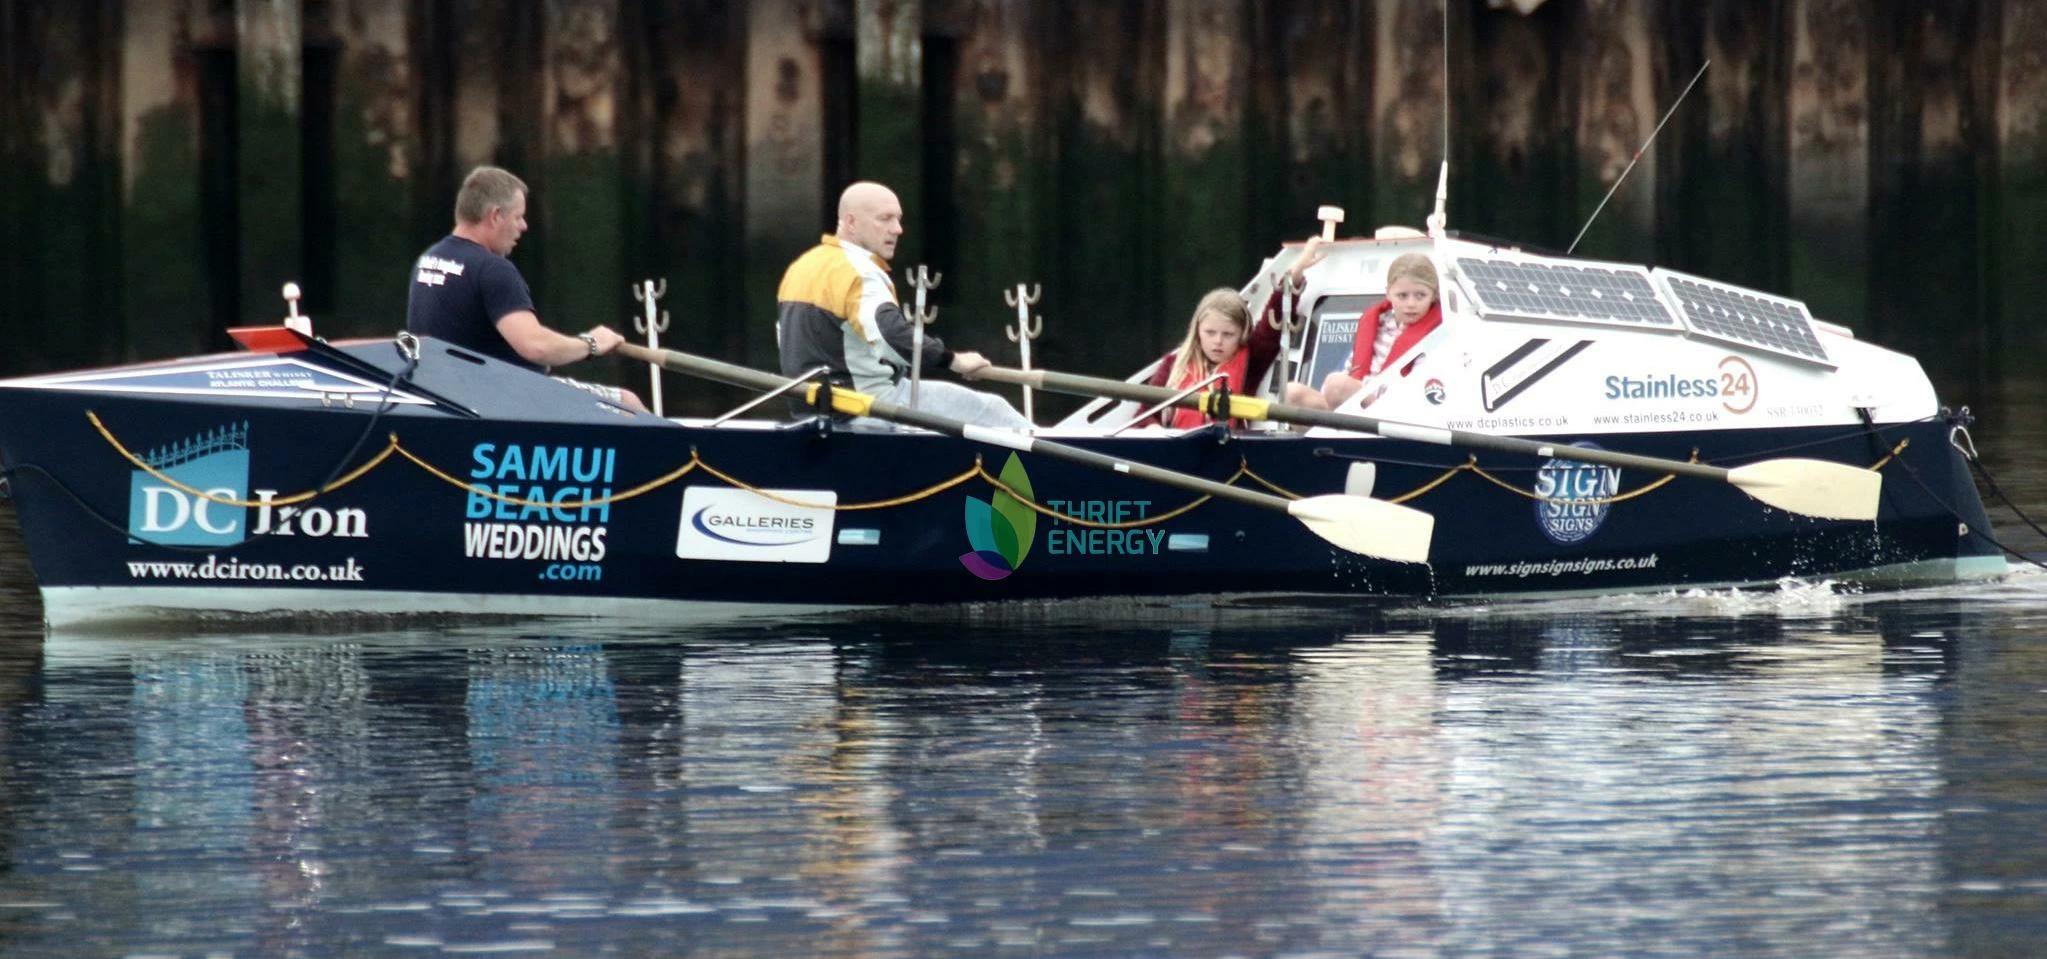 Sean McGuigan and Andy Warner training on the boat that will take them across the Atlantic.